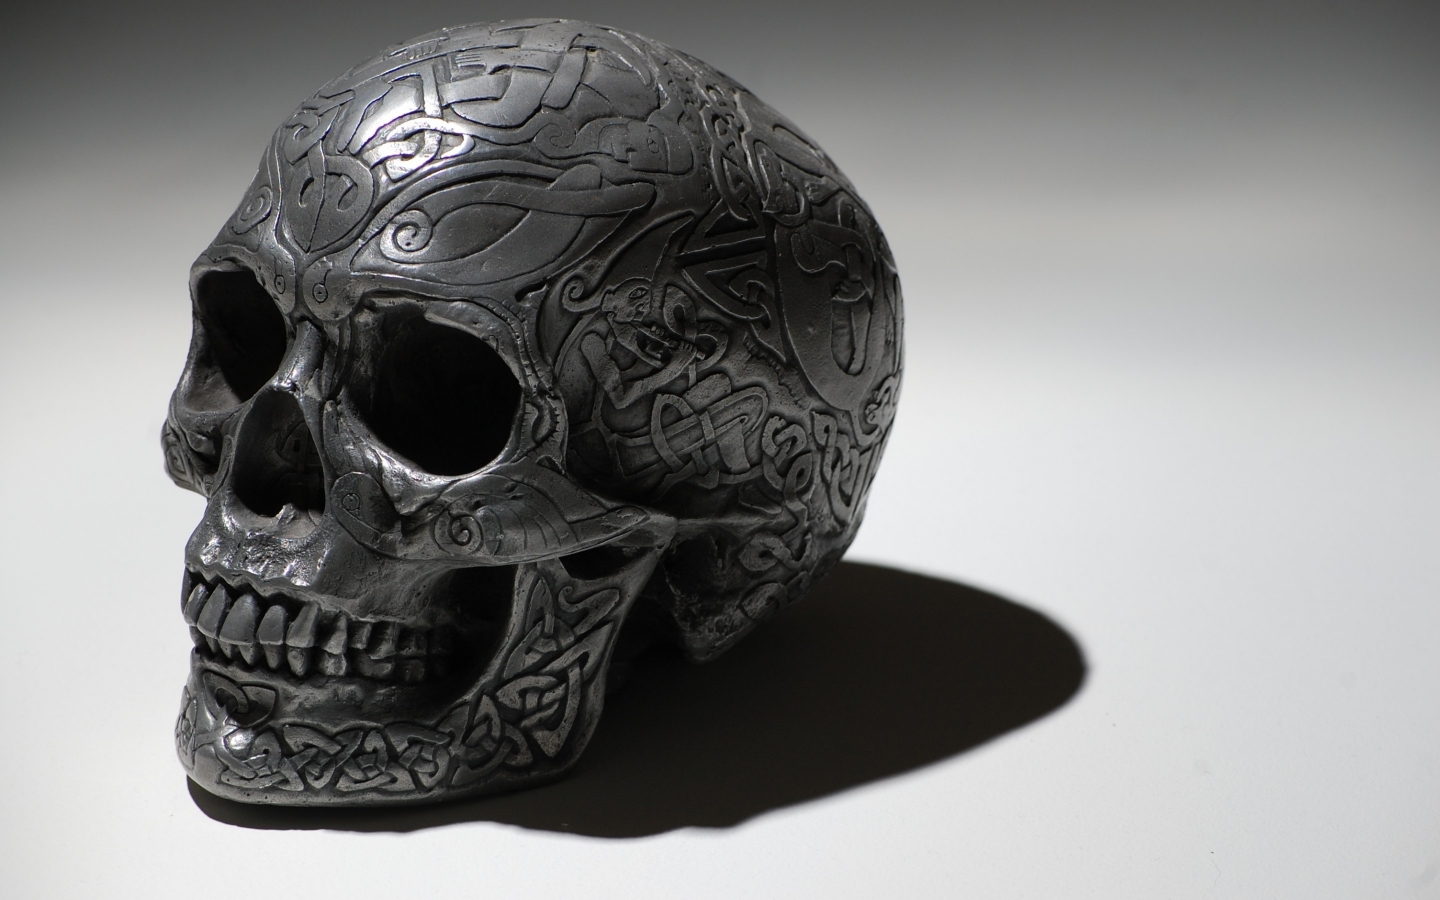 Metal Skull for 1440 x 900 widescreen resolution